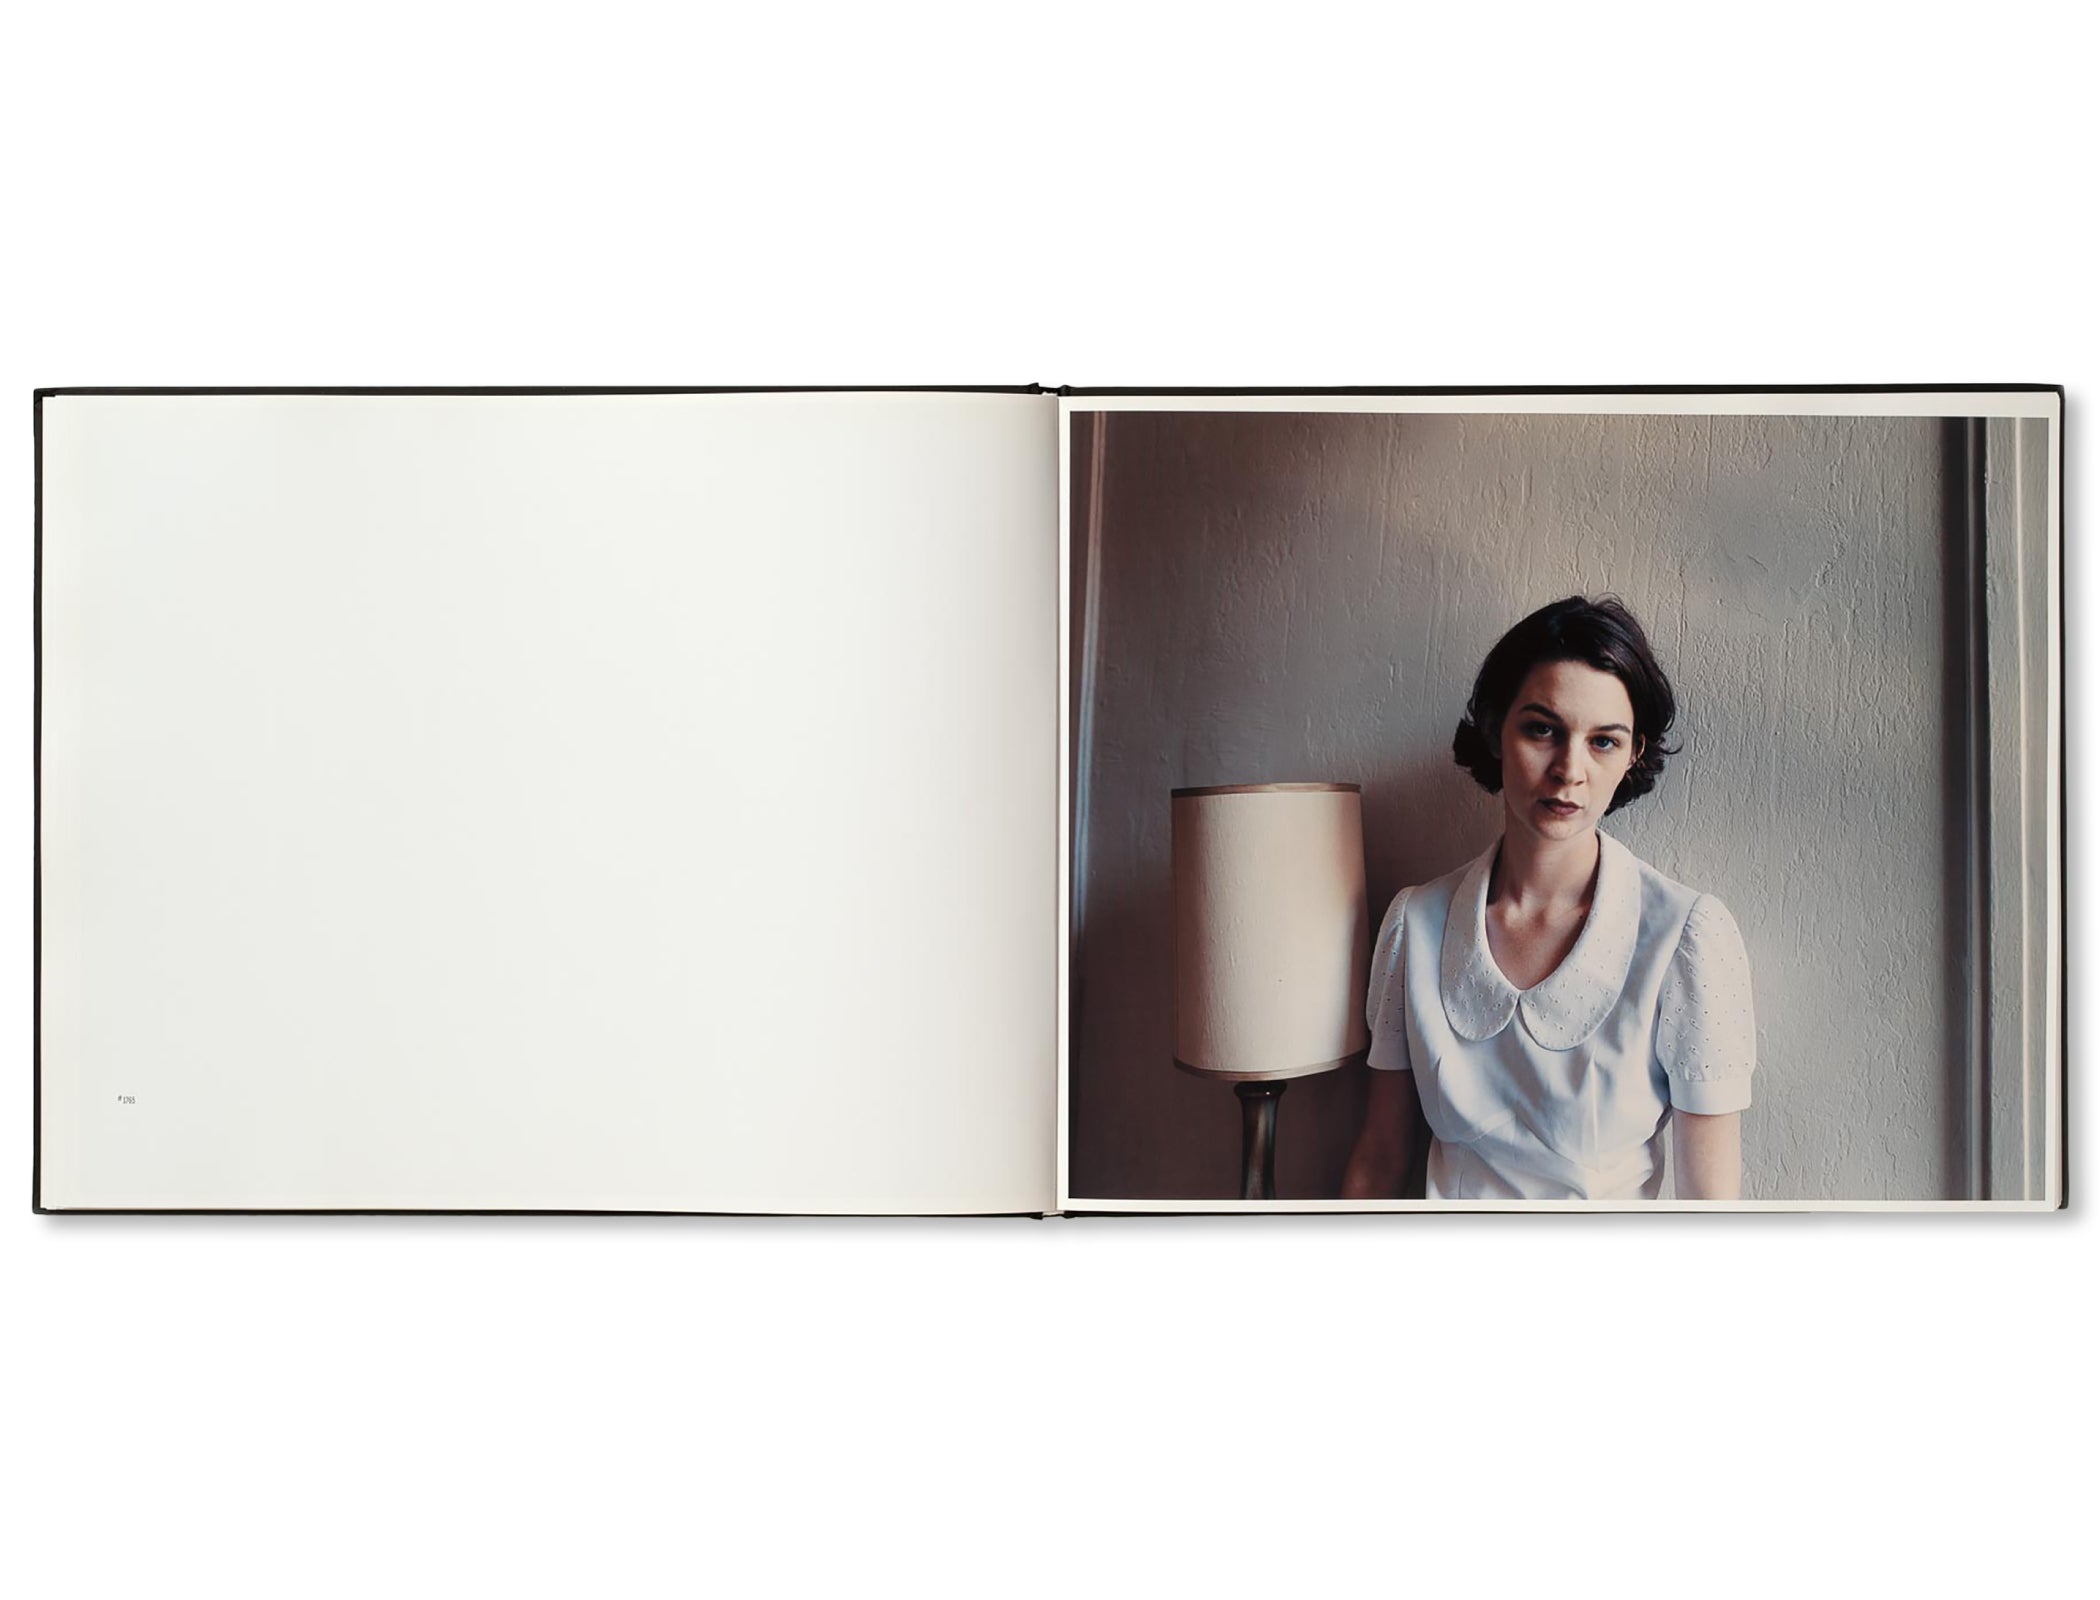 BETWEEN THE TWO by Todd Hido [FIRST EDITION]